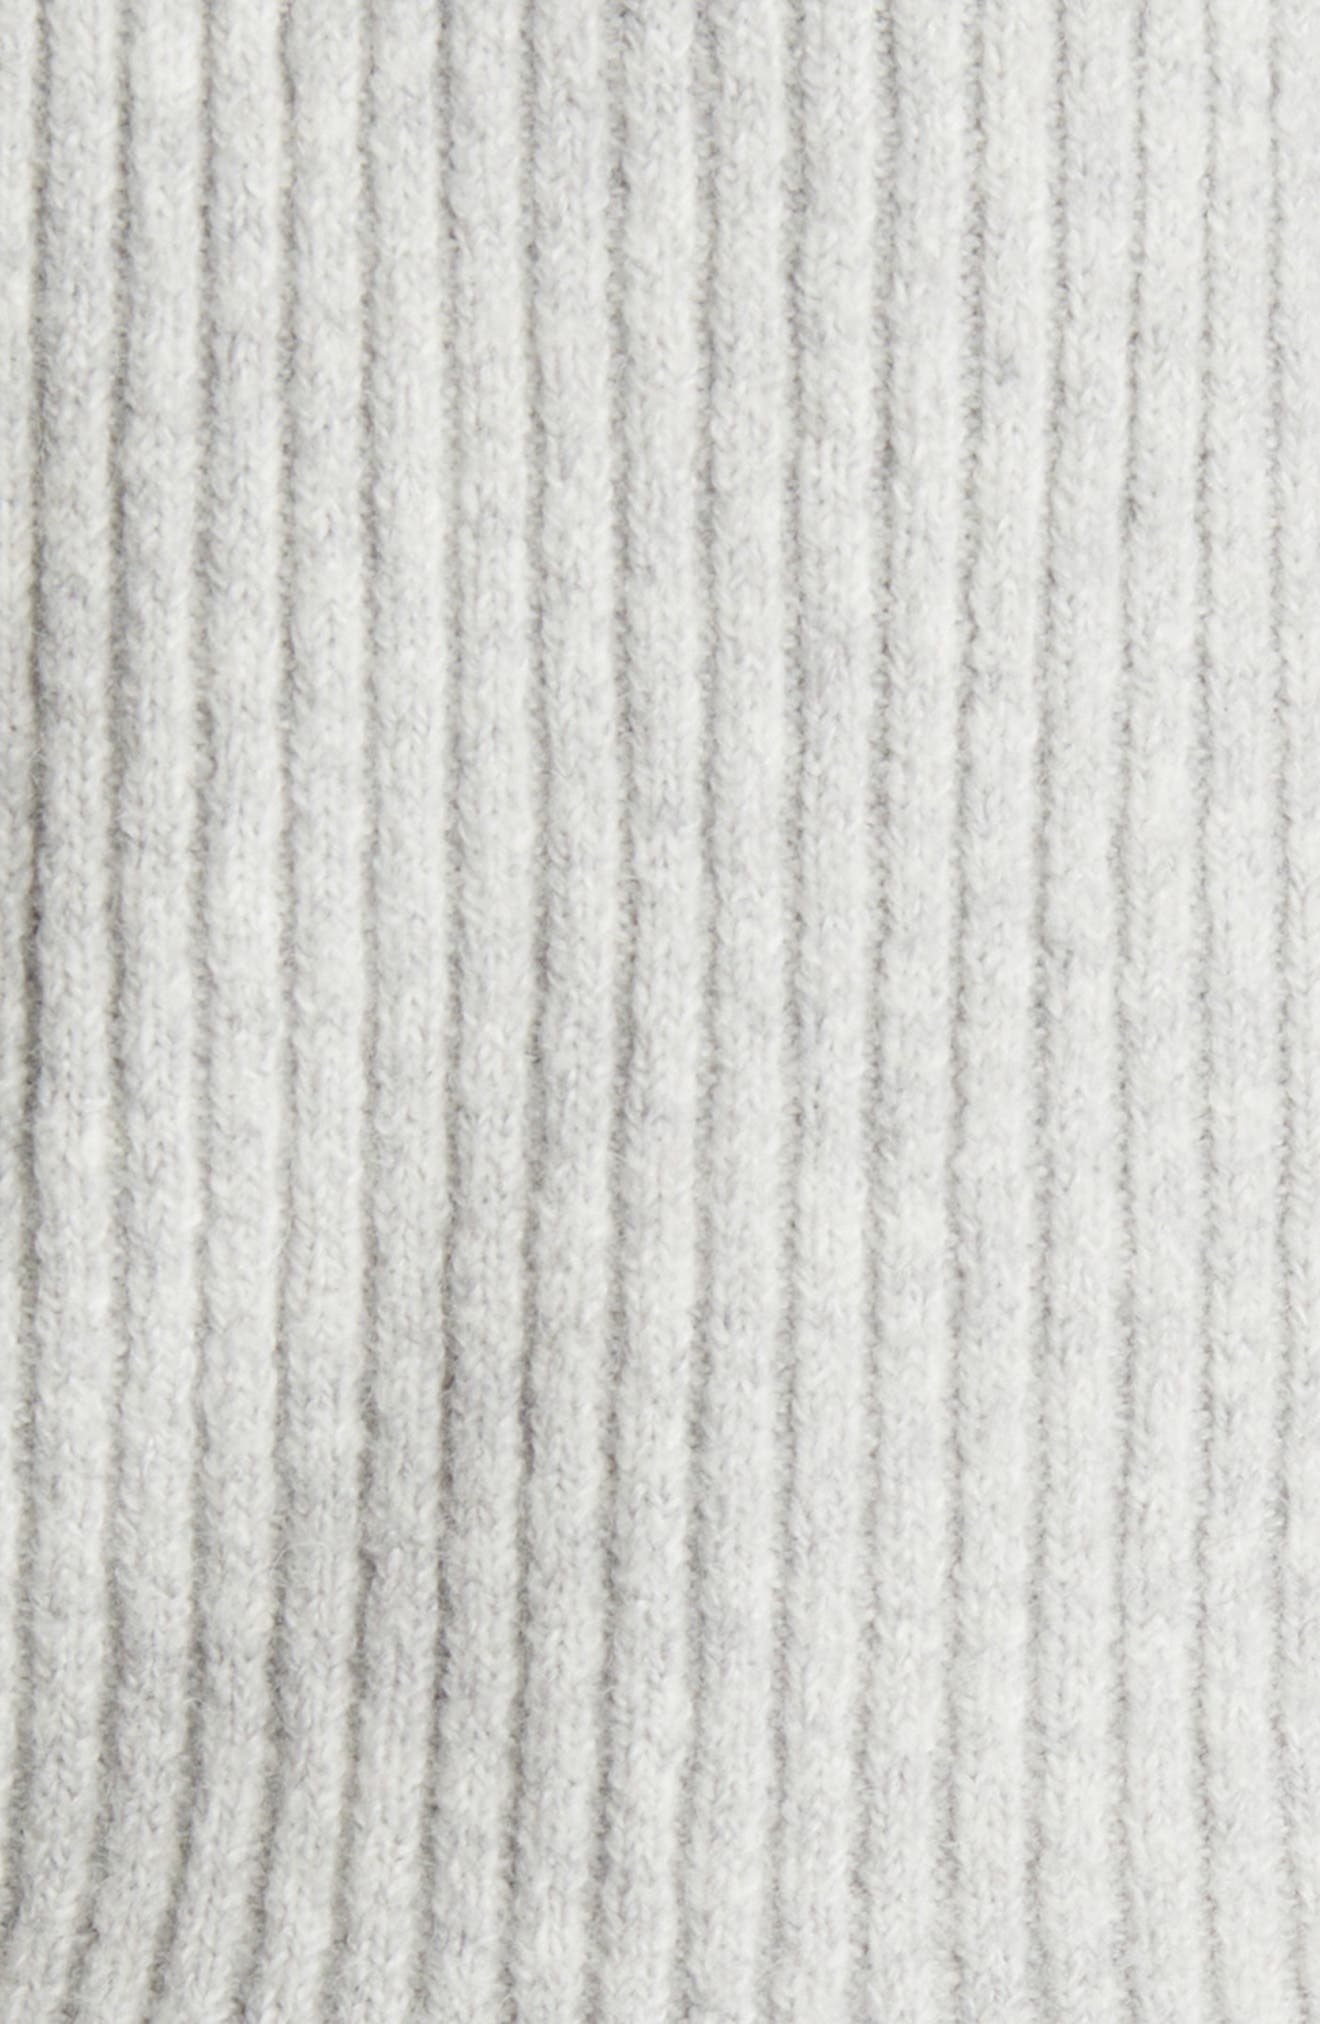 Heather Ivory Ribbed Sweater Jersey Knit Fabric